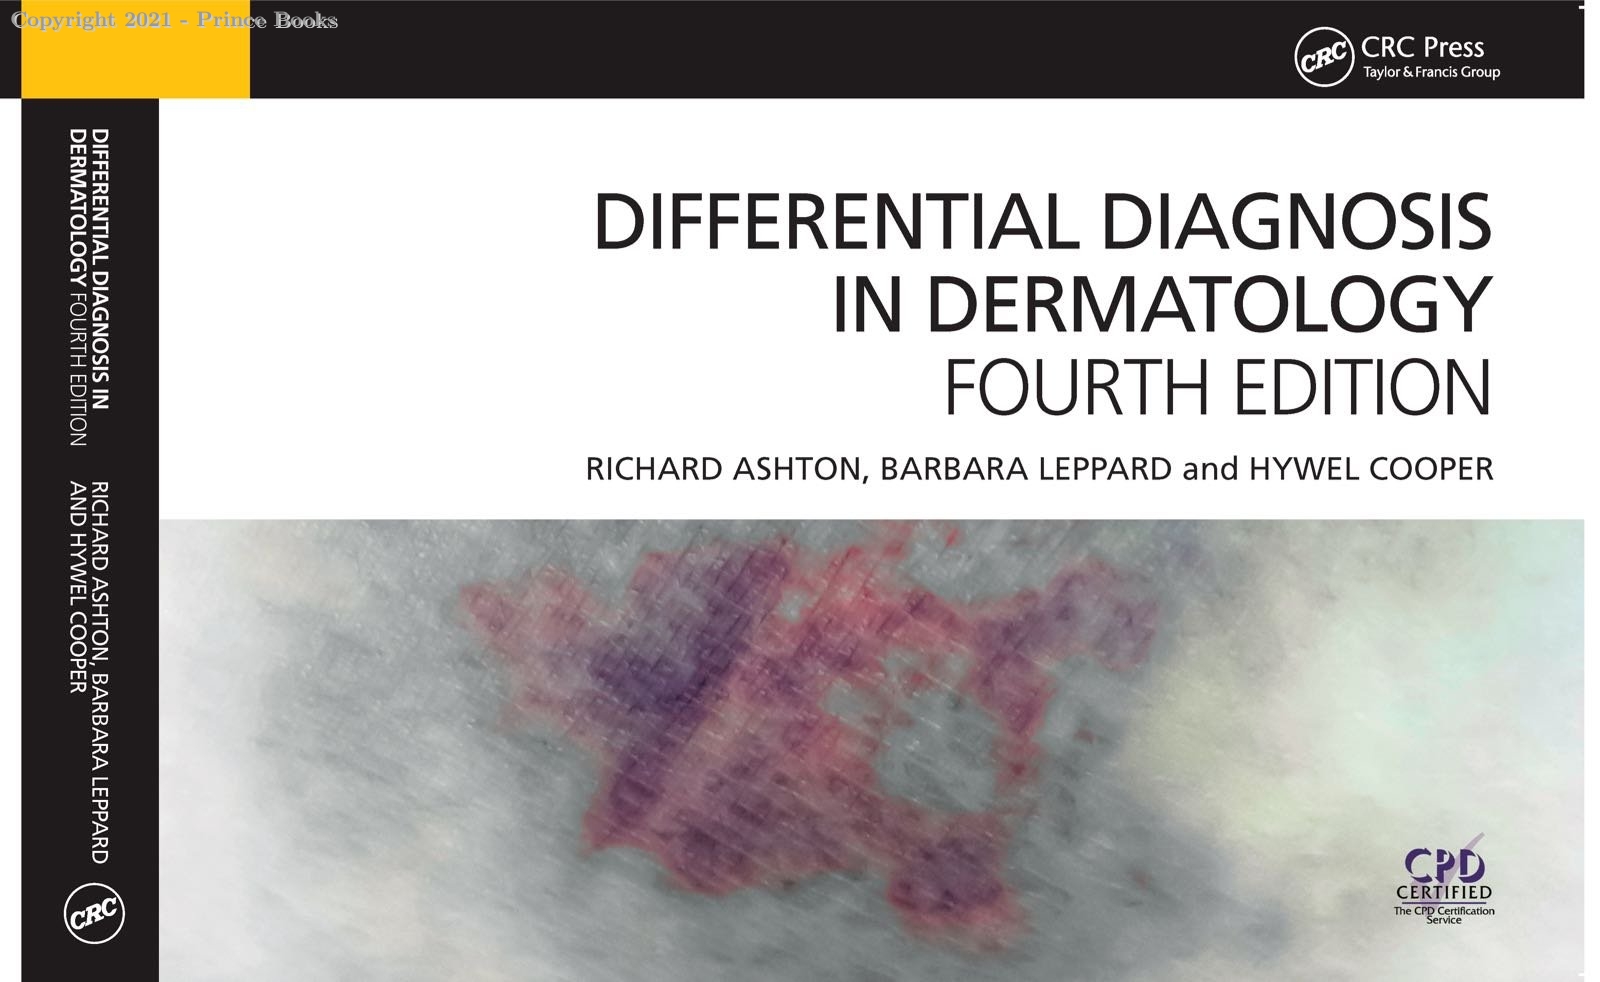 DIFFERENTIAL DIAGNOSIS IN DERMATOLOGY, 4E